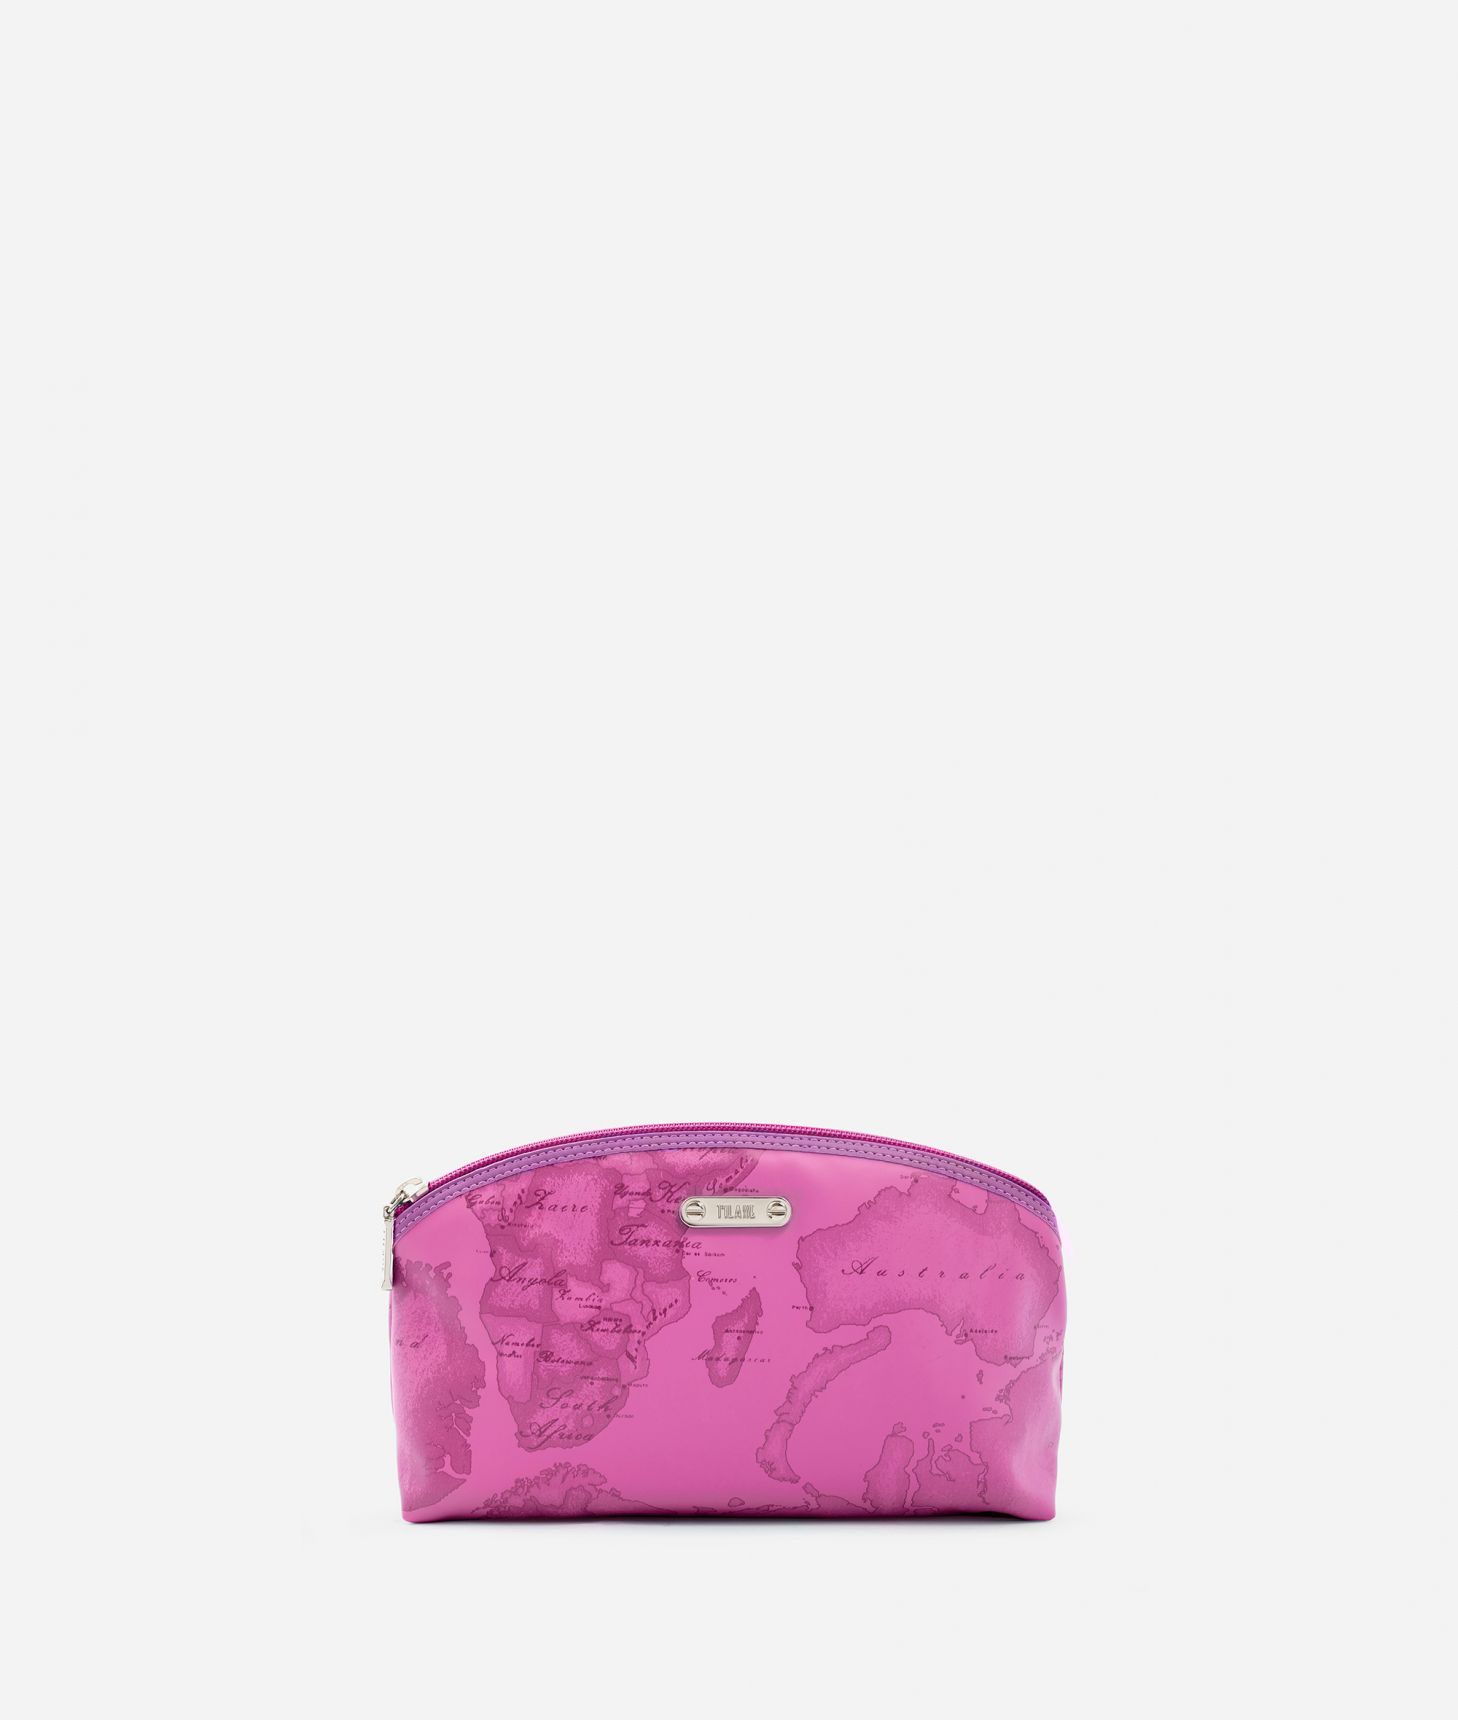 Medium beauty case in mauve rubberized fabric,front